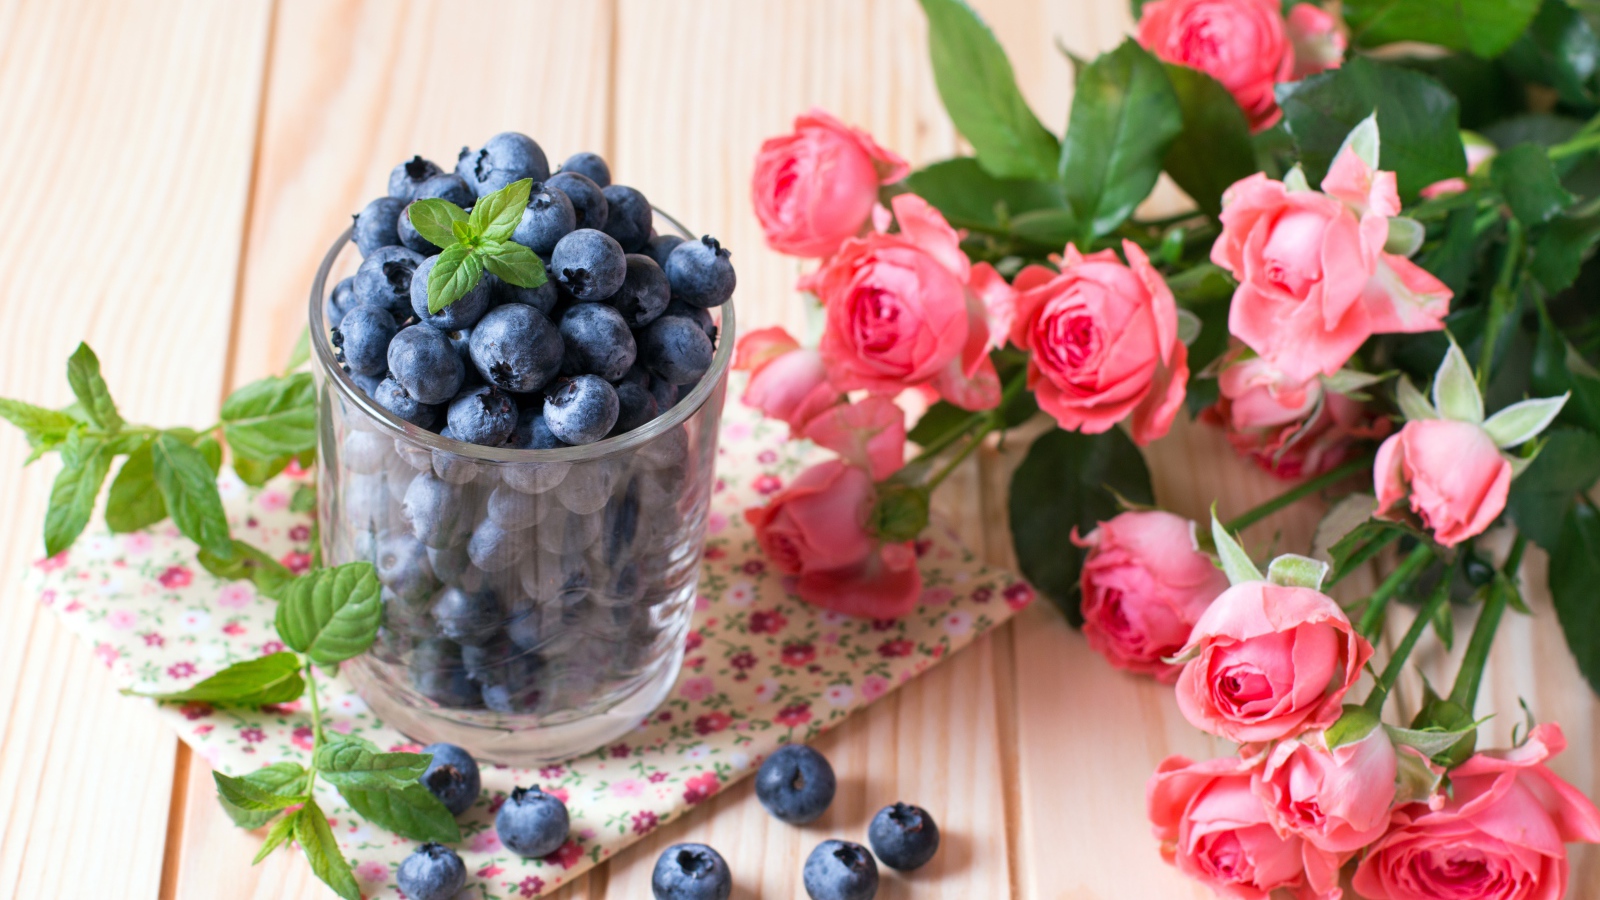 Glass of blueberries on the table with a bouquet of pink roses